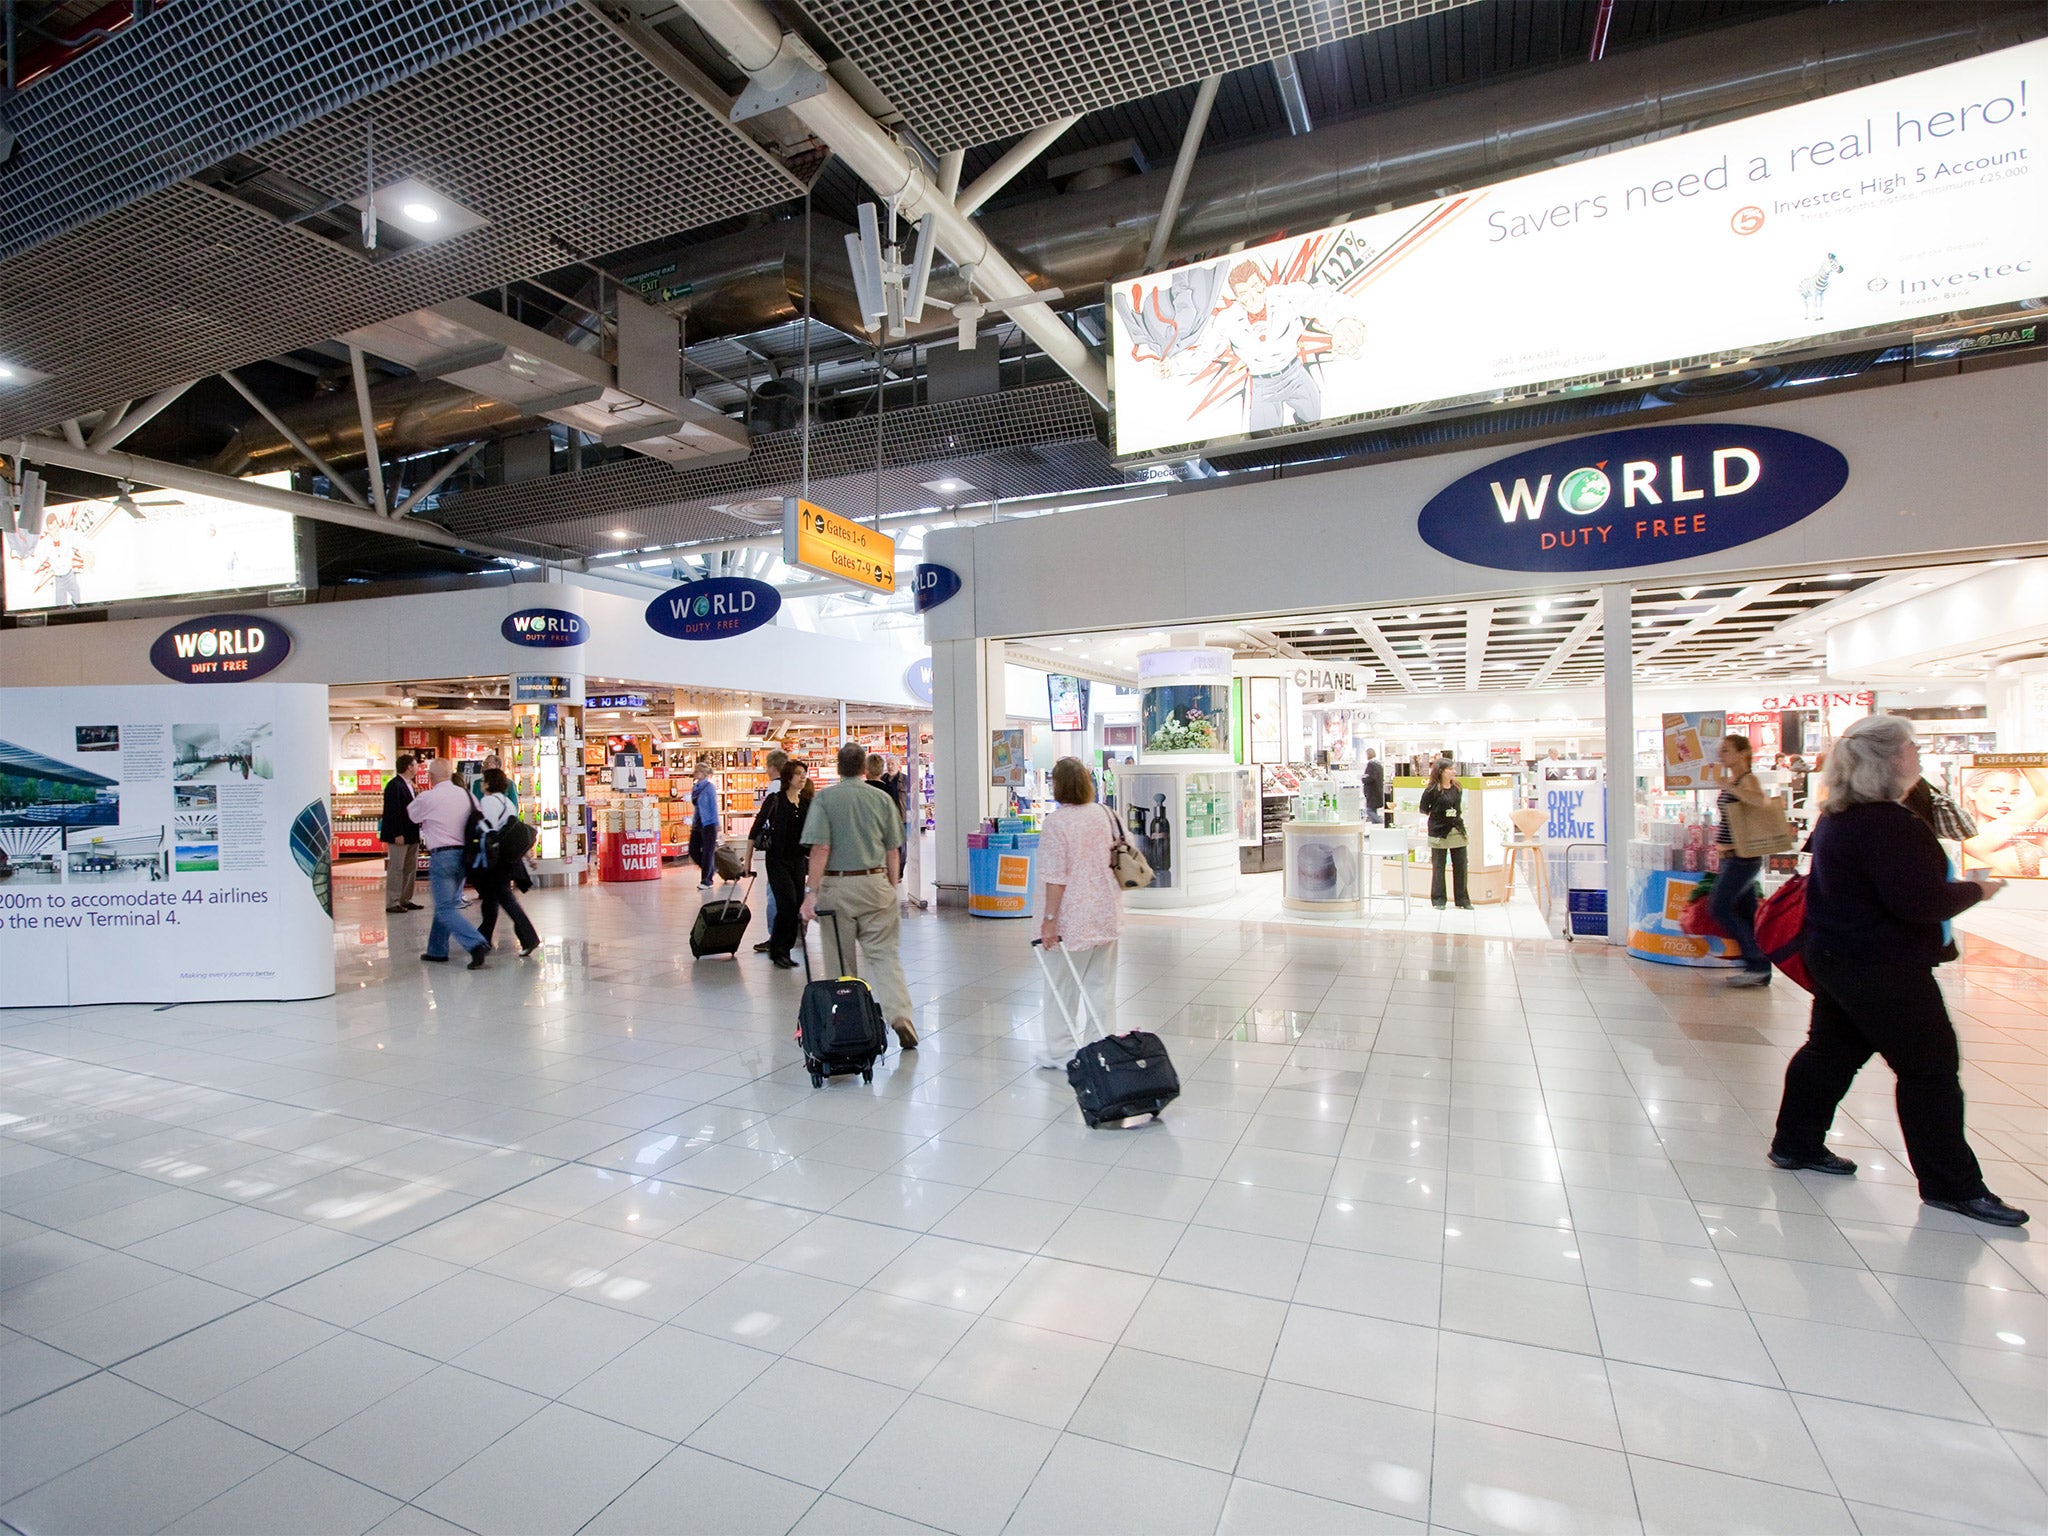 Heathrow Terminal 4; each retailer at the airport is paying £1m a year in rent, on average